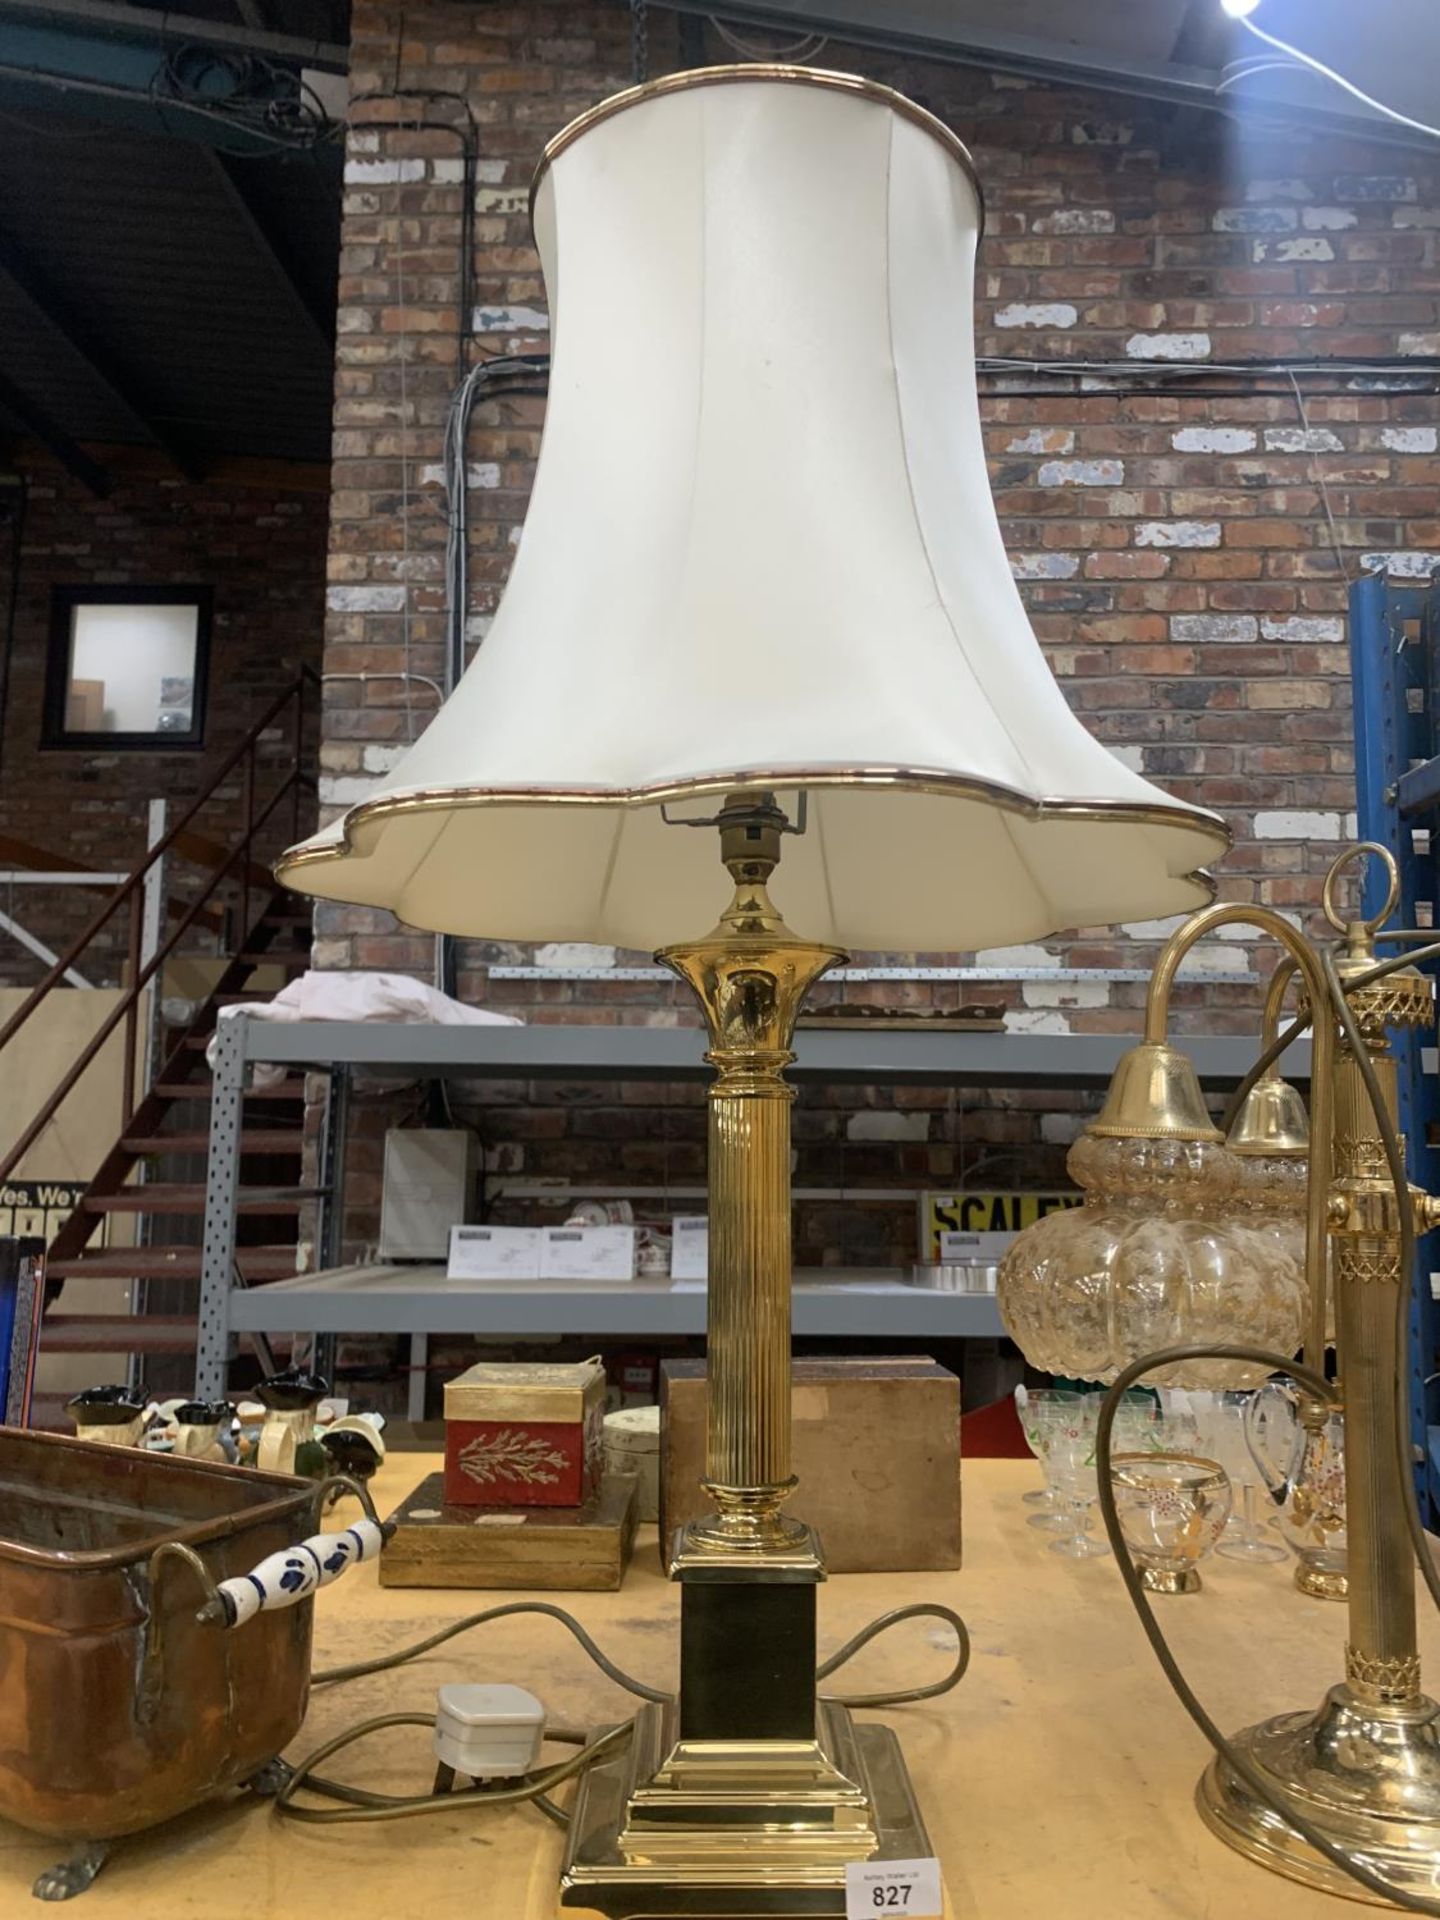 TWO BRASS TABLE LAMPS, ONE WITH A COLUMN STYLE BASE AND THE OTHER WITH THREE BRANCHES AND GLASS - Image 2 of 3